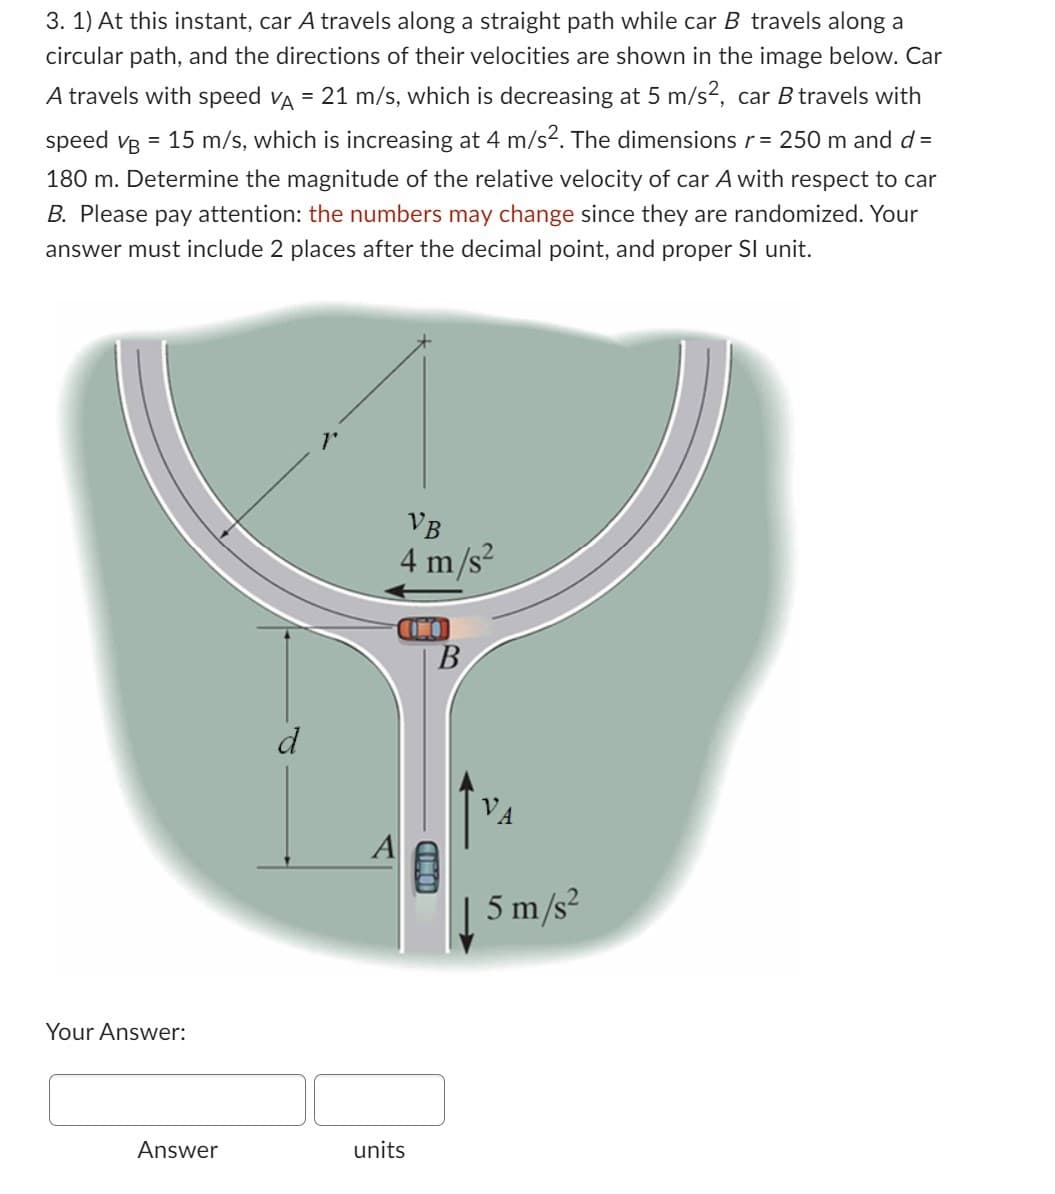 3. 1) At this instant, car A travels along a straight path while car B travels along a
circular path, and the directions of their velocities are shown in the image below. Car
A travels with speed VA = 21 m/s, which is decreasing at 5 m/s², car B travels with
speed vg = 15 m/s, which is increasing at 4 m/s². The dimensions r = 250 m and d =
180 m. Determine the magnitude of the relative velocity of car A with respect to car
B. Please pay attention: the numbers may change since they are randomized. Your
answer must include 2 places after the decimal point, and proper SI unit.
Your Answer:
Answer
A
VB
4 m/s²
units
00
B
IOMID
A
5 m/s²